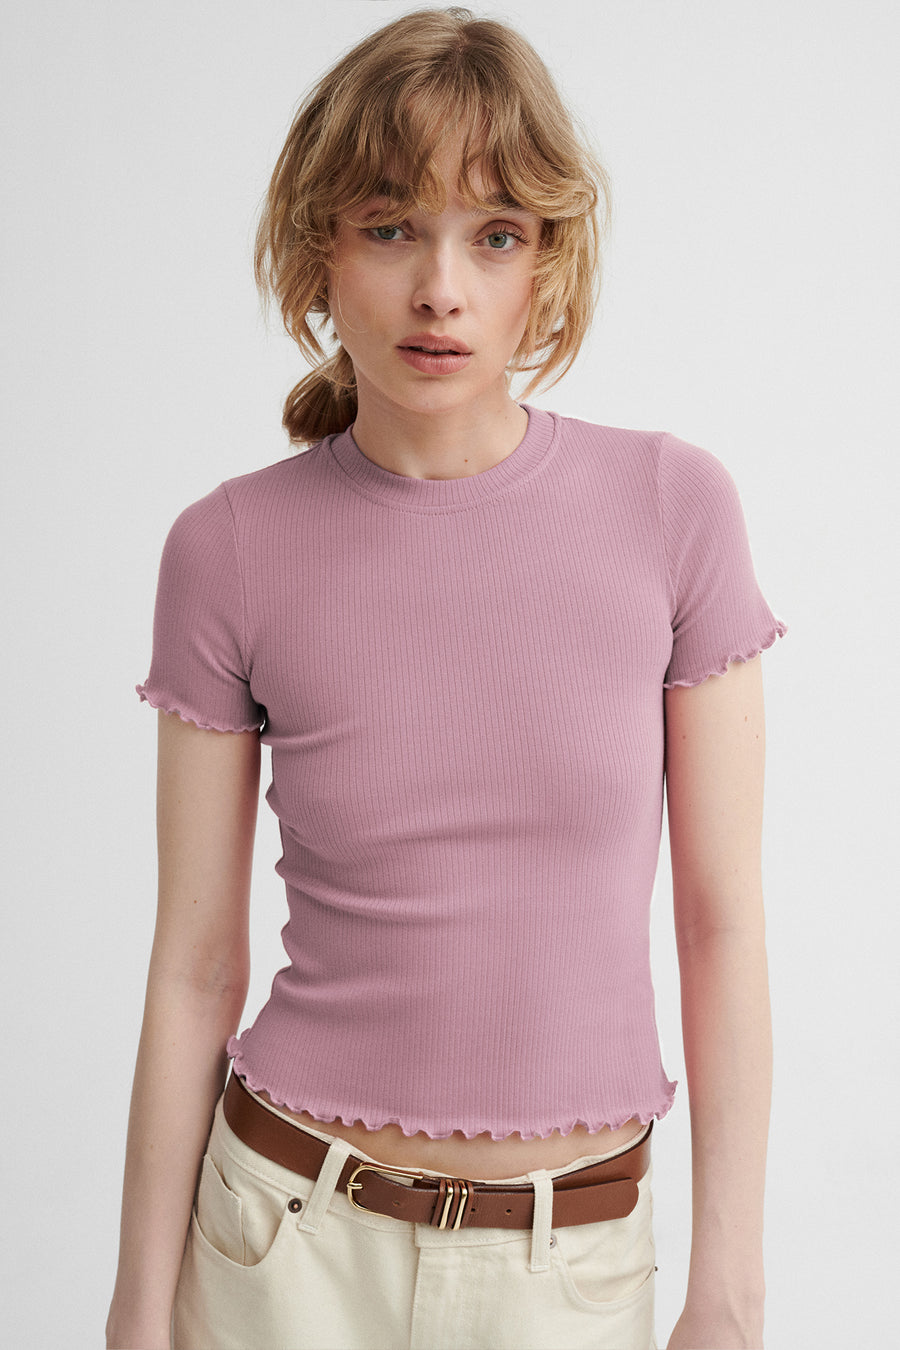 T-shirt in organic cotton / 13 / 25 / dusty pink